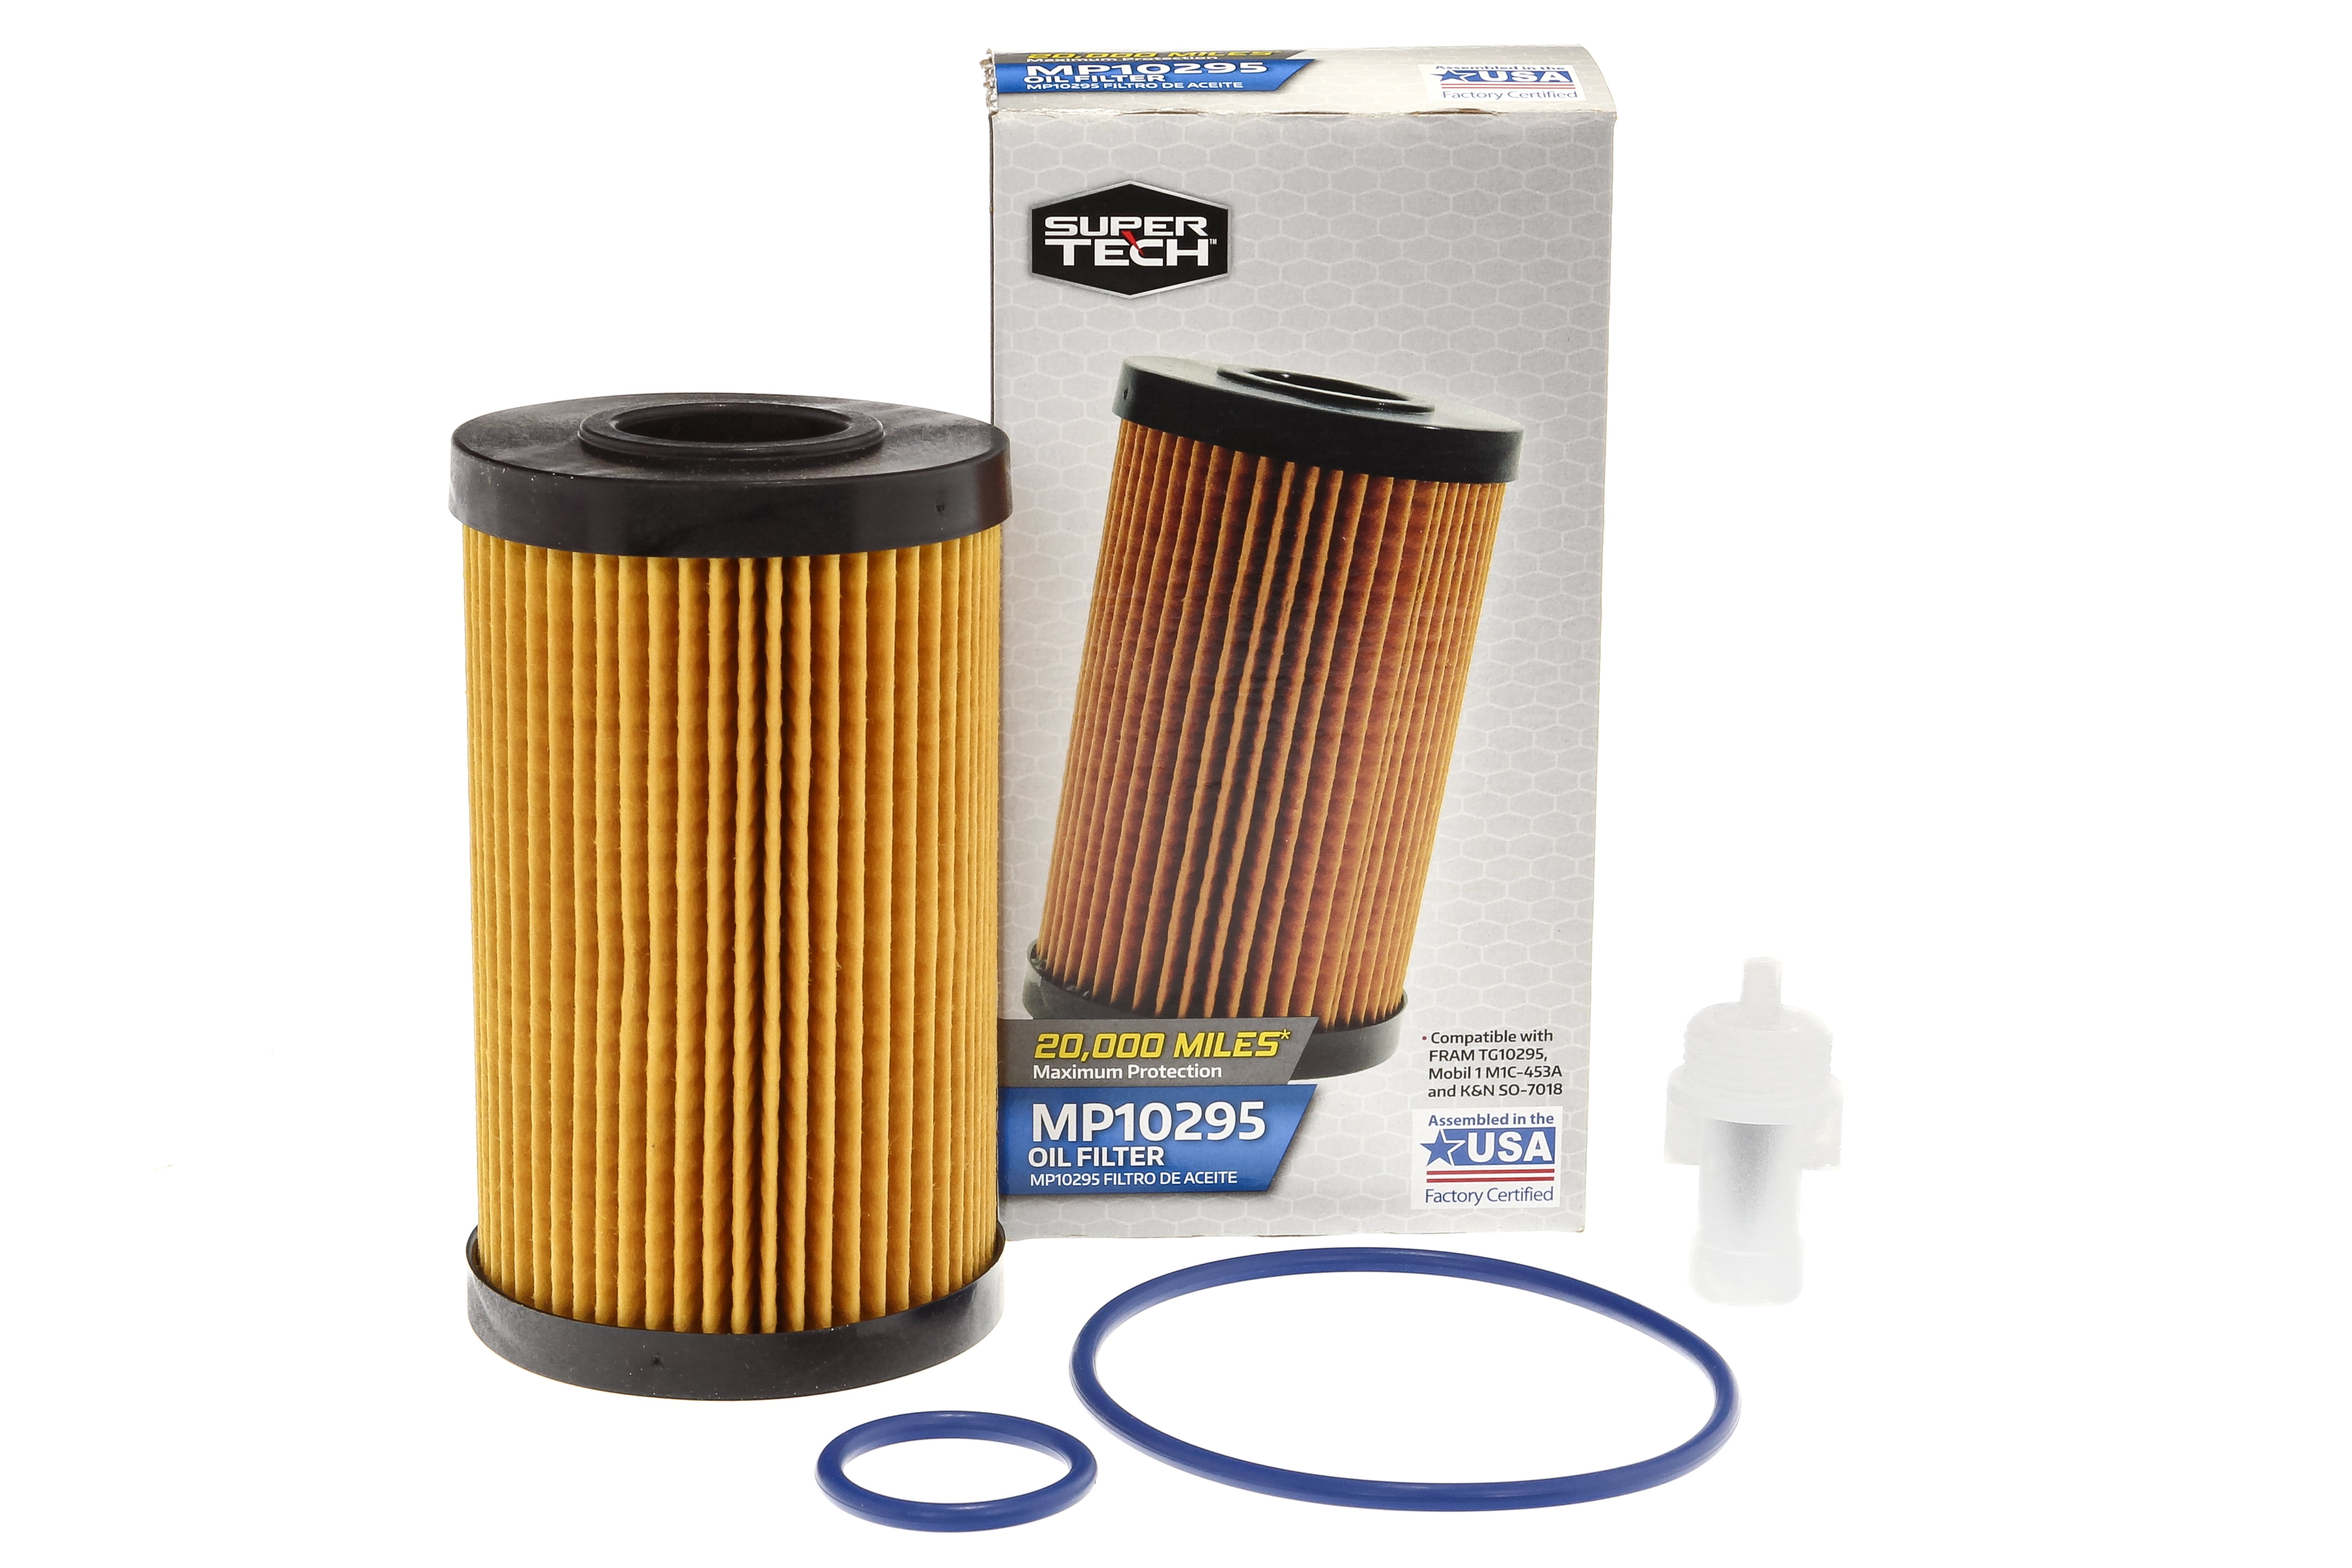 SuperTech Maximum Performance 20,000 mile Synthetic Oil Filter